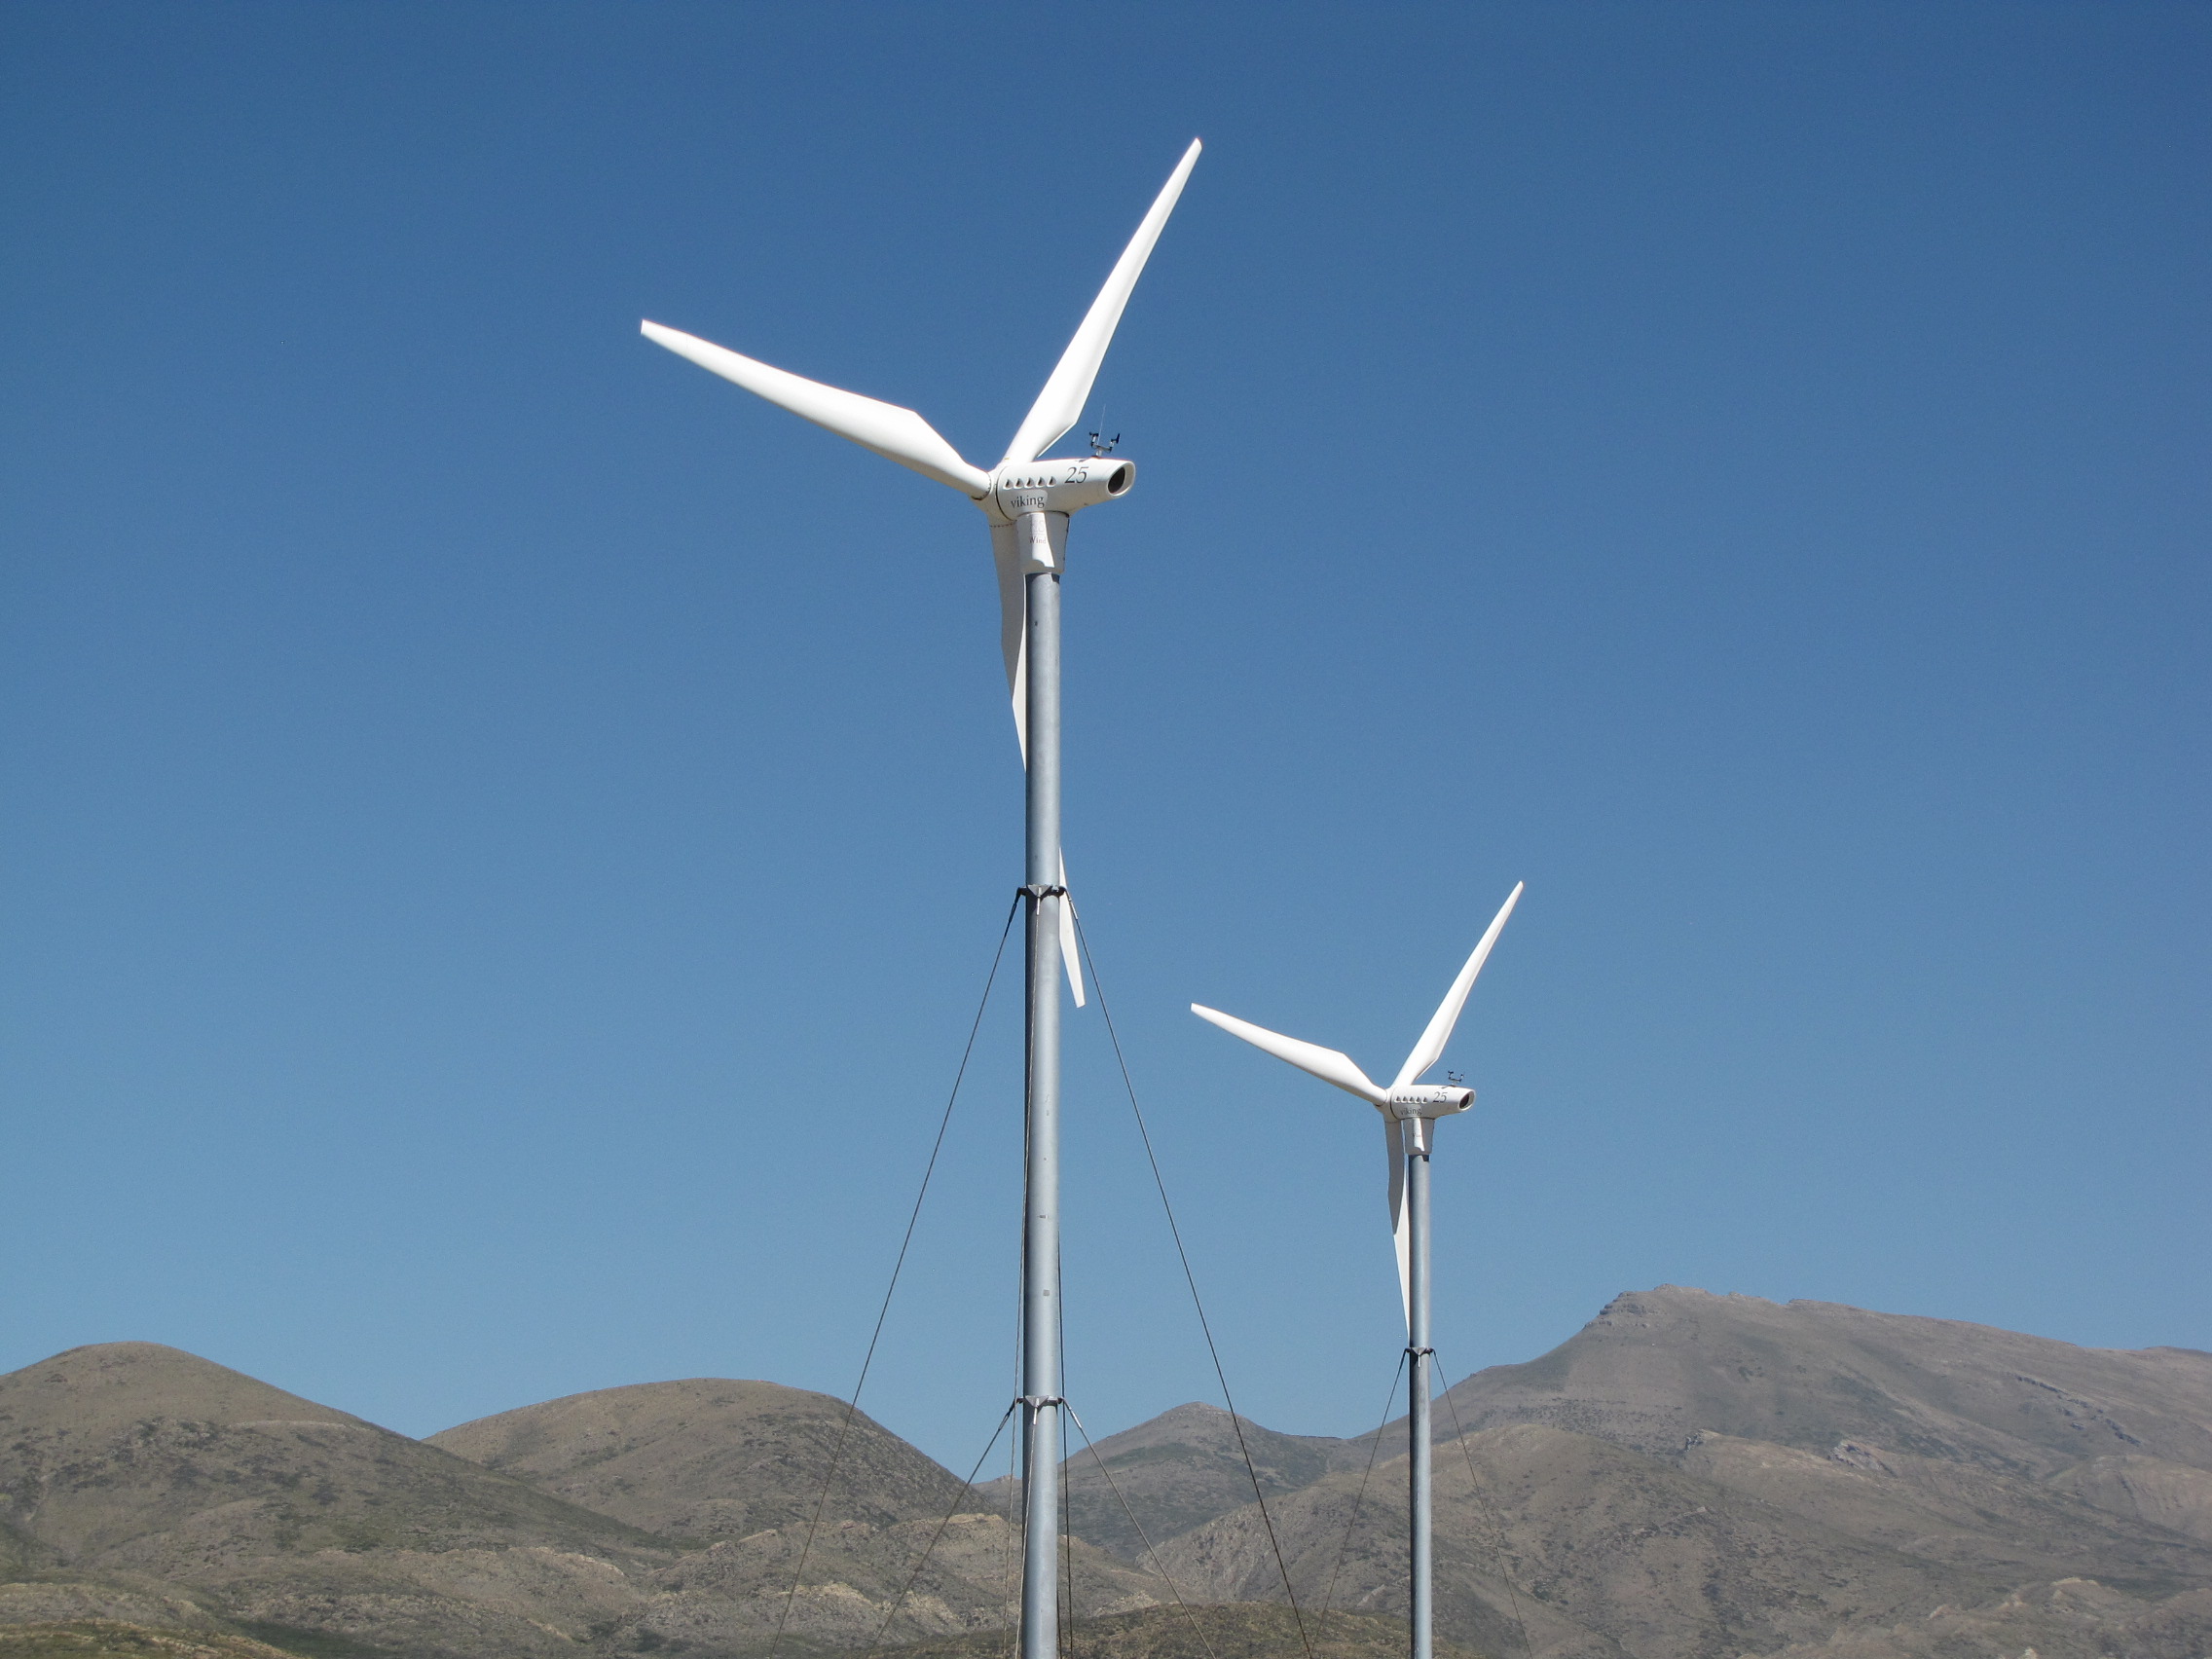 Enel is electrifying the rural area surrounding its new wind plant